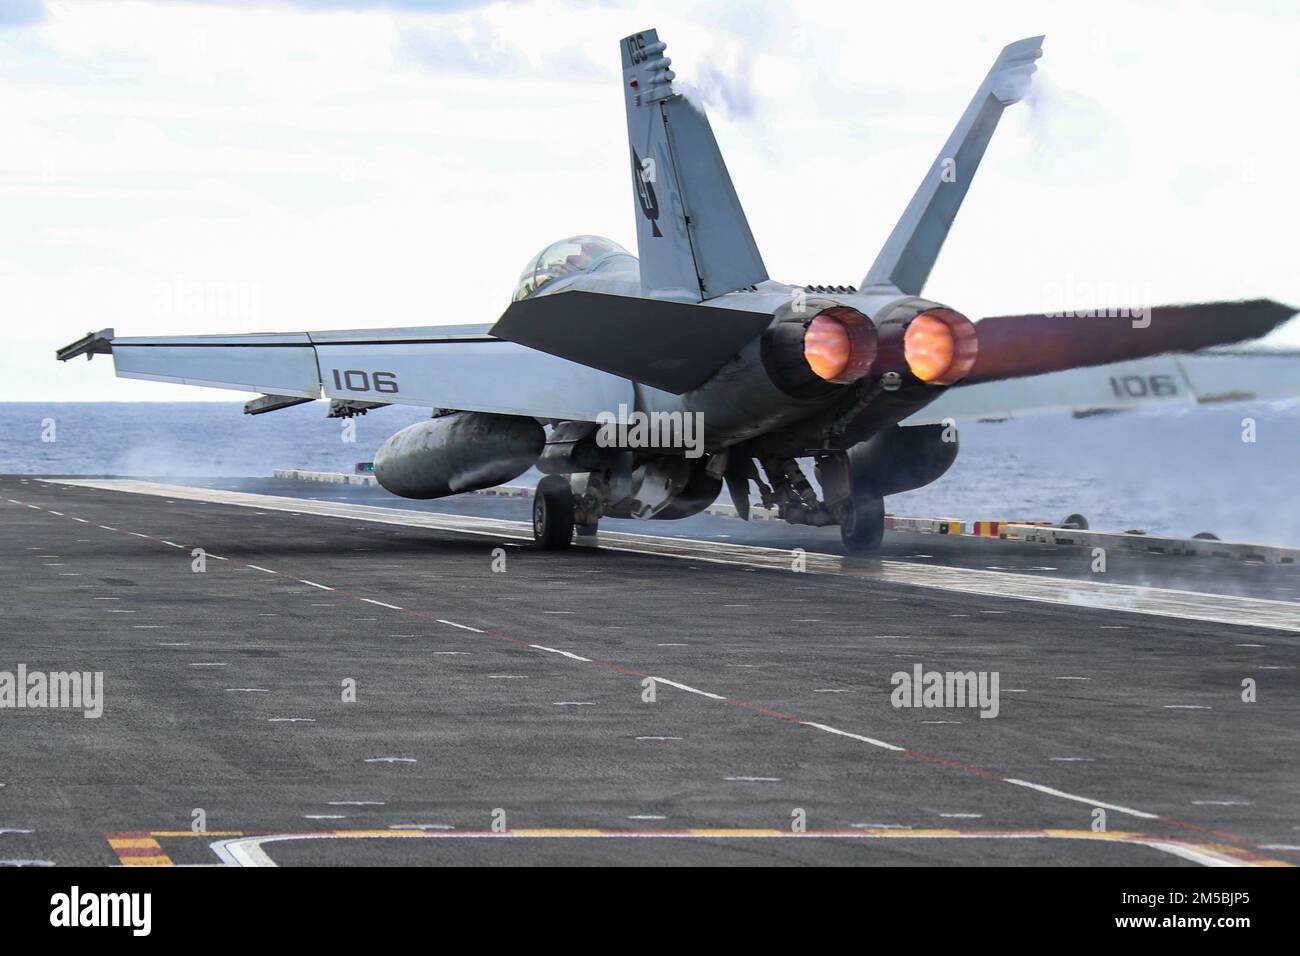 PHILIPPINE SEA (Feb. 23, 2022) Capt. Michael Langbehn, commander, Carrier Air Wing (CVW) 9, and Capt. Brian A. Ribota, commodore, Destroyer Squadron 21, launch in an F/A-18F Super Hornet, assigned to the 'Black Aces' of Strike Fighter Squadron (VFA) 41, from the flight deck of the Nimitz-class aircraft carrier USS Abraham Lincoln (CVN 72). Abraham Lincoln Strike Group is on a scheduled deployment in the U.S. 7th Fleet area of operations to enhance interoperability through alliances and partnerships while serving as a ready-response force in support of a free and open Indo-Pacific region. Stock Photo